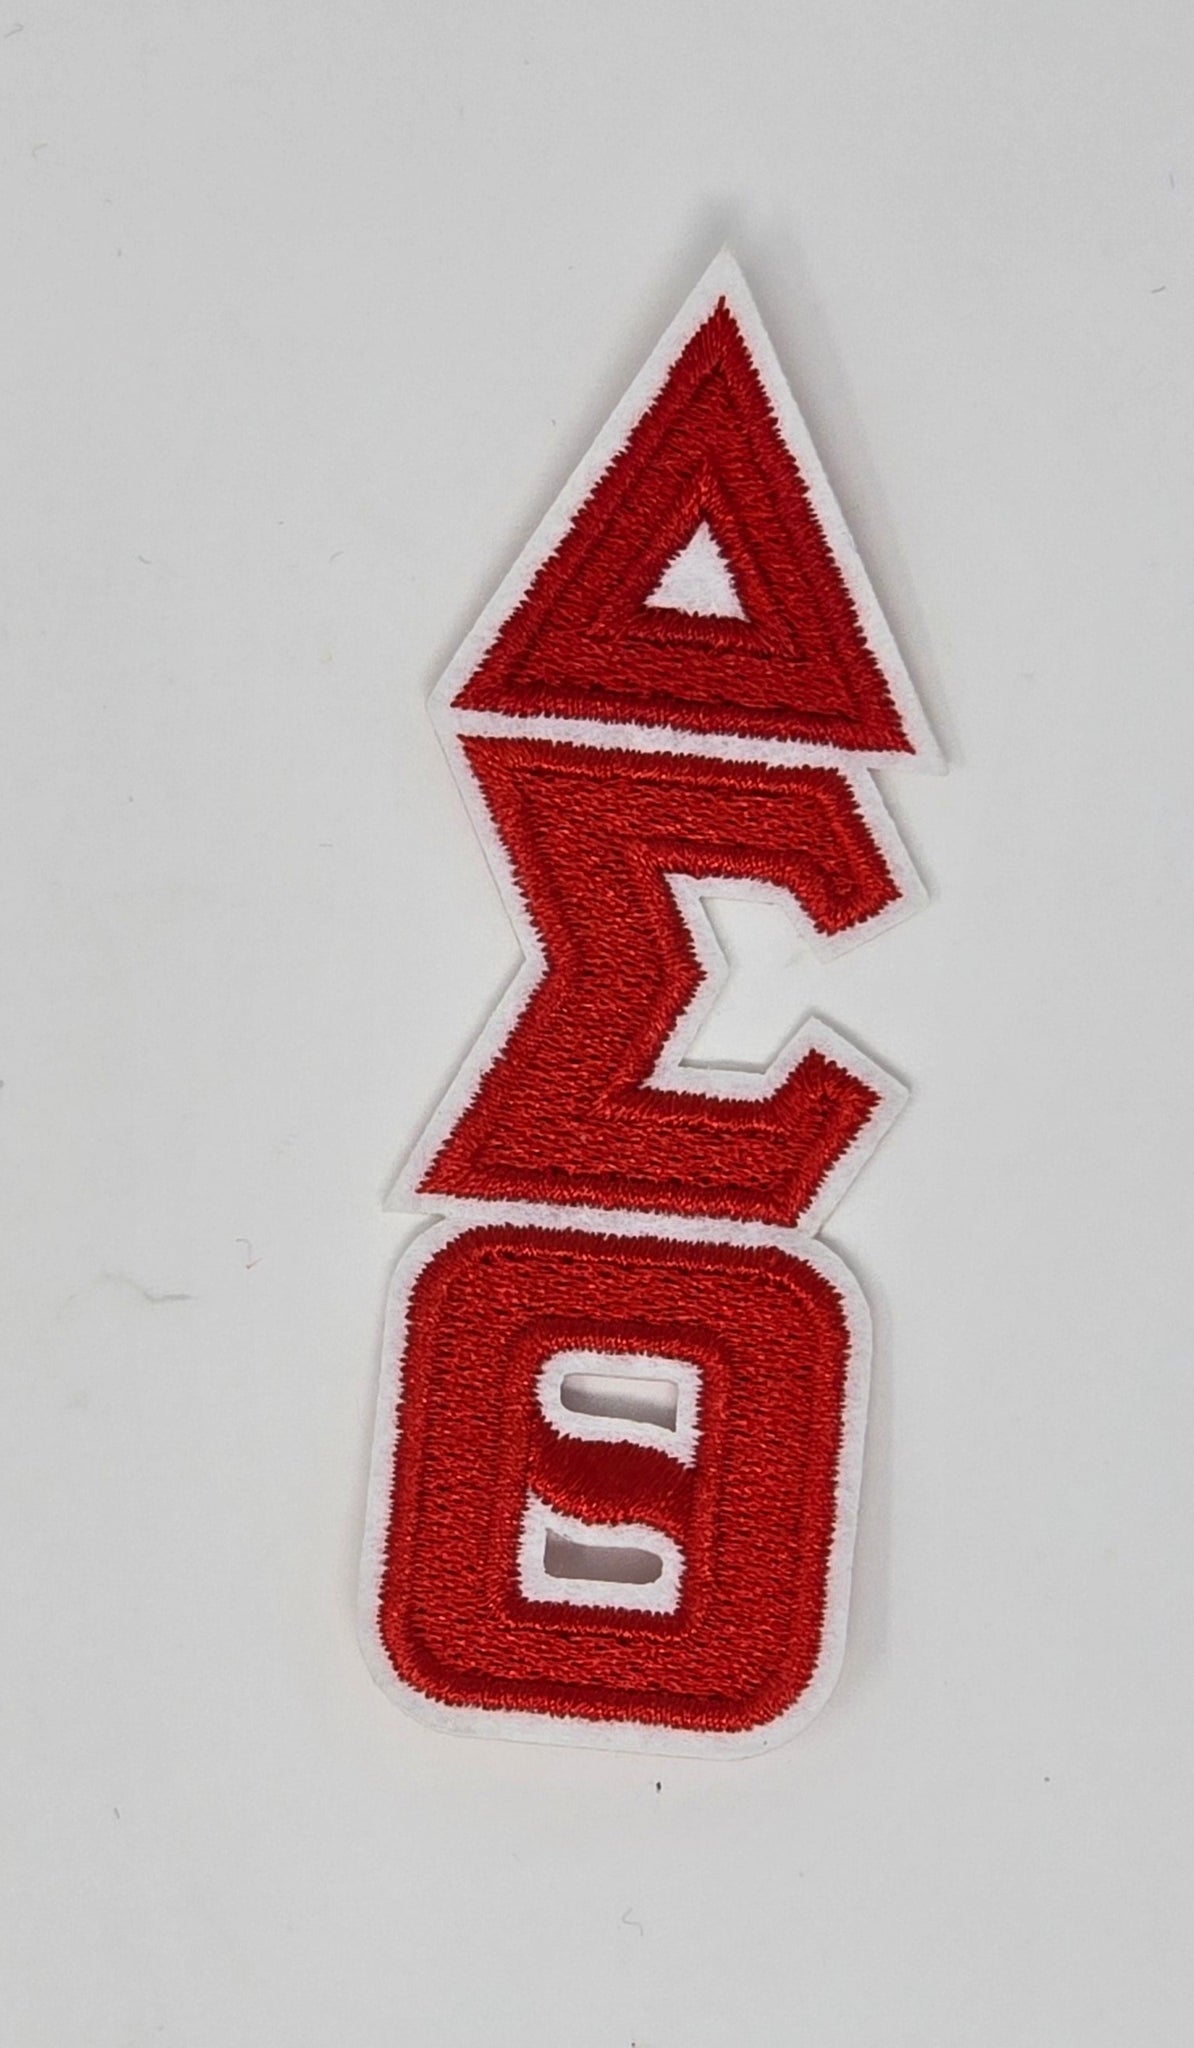 Delta Sigma Theta Sorority Inc., Embroidered Patch - DST (vertical)